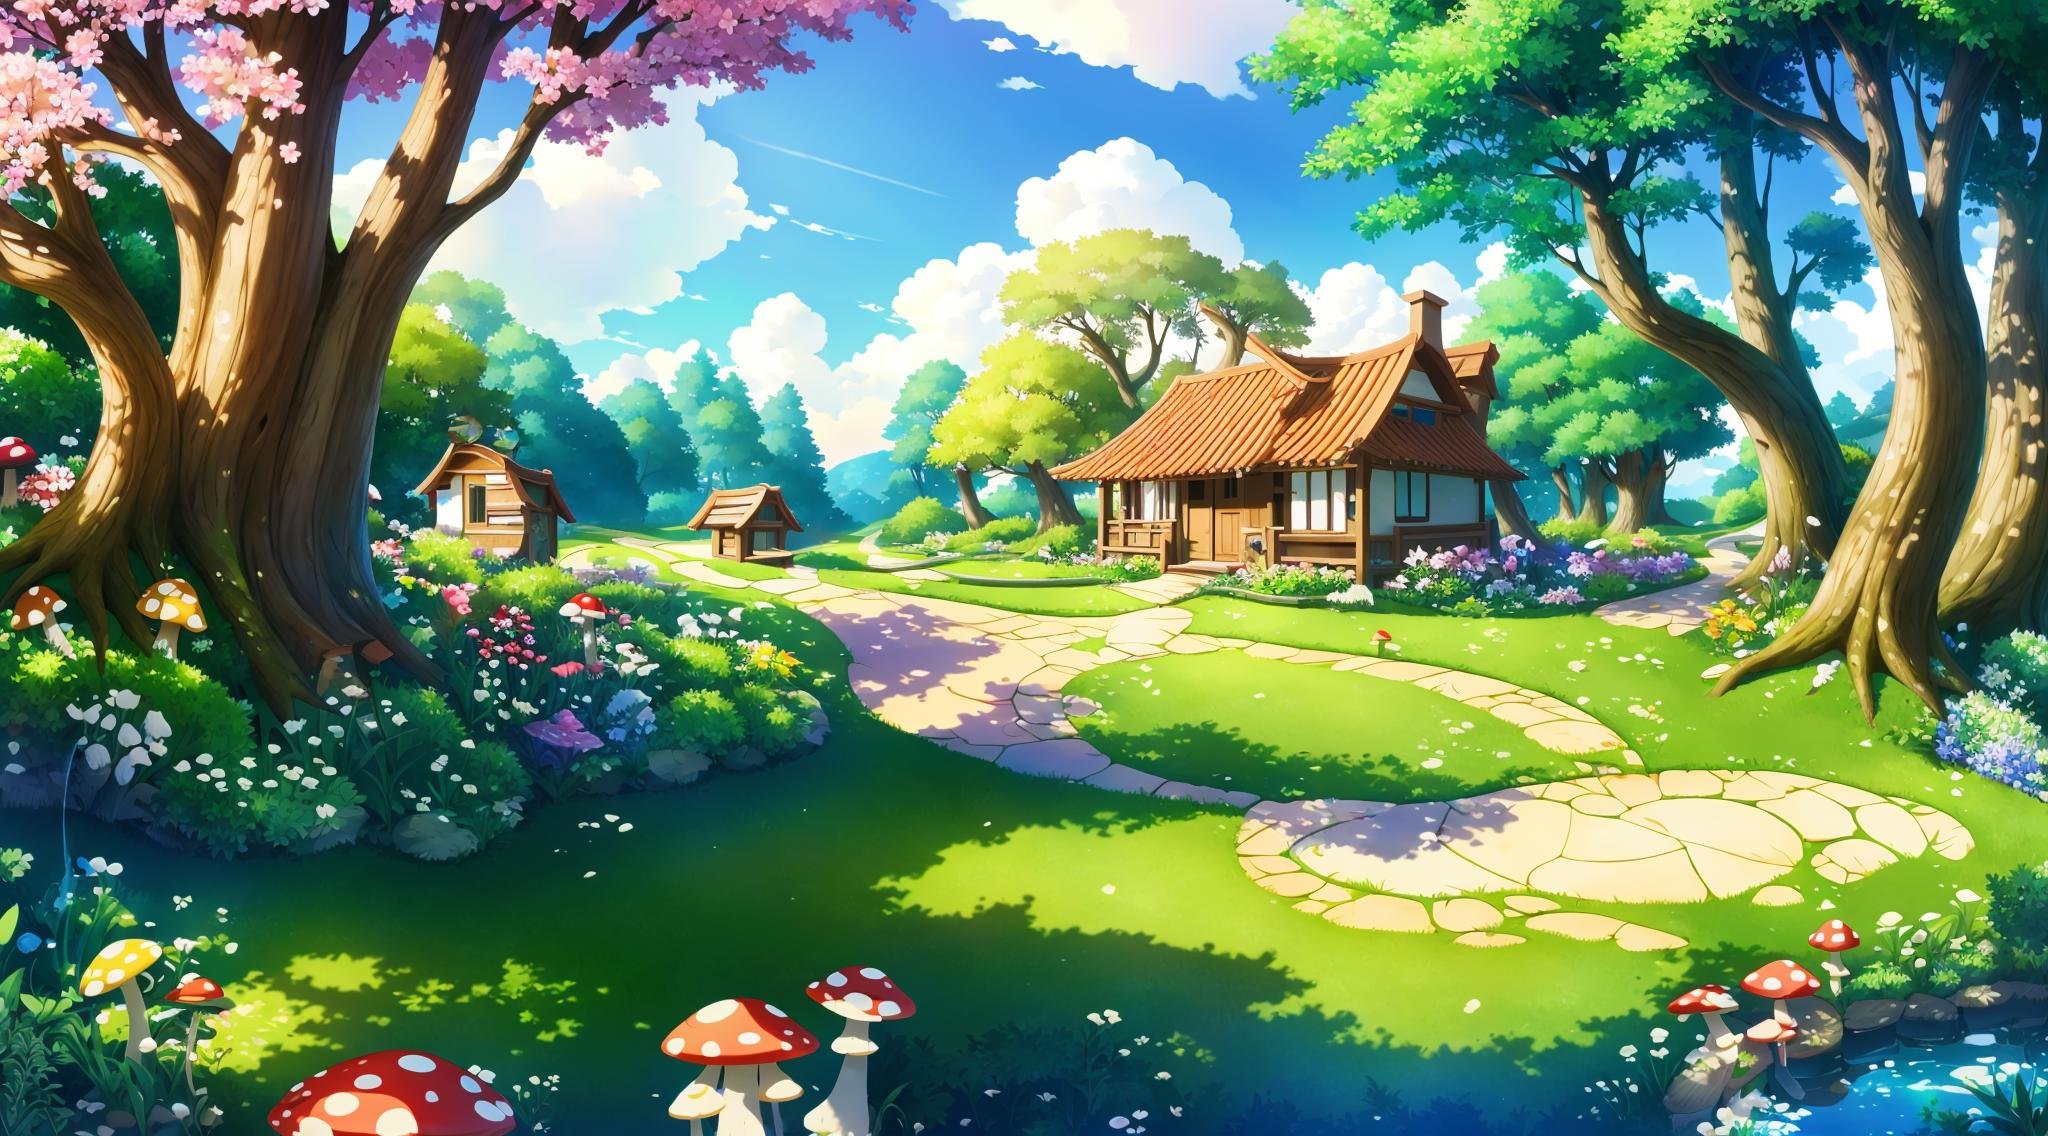 Concept art, horizontal scenes, horizontal line composition, tree, scenery, outdoors, house, grass, day, flower, nature, fantasy, sky, water, mushroom, forest, cloud, road<lora:hengban:0.8>,